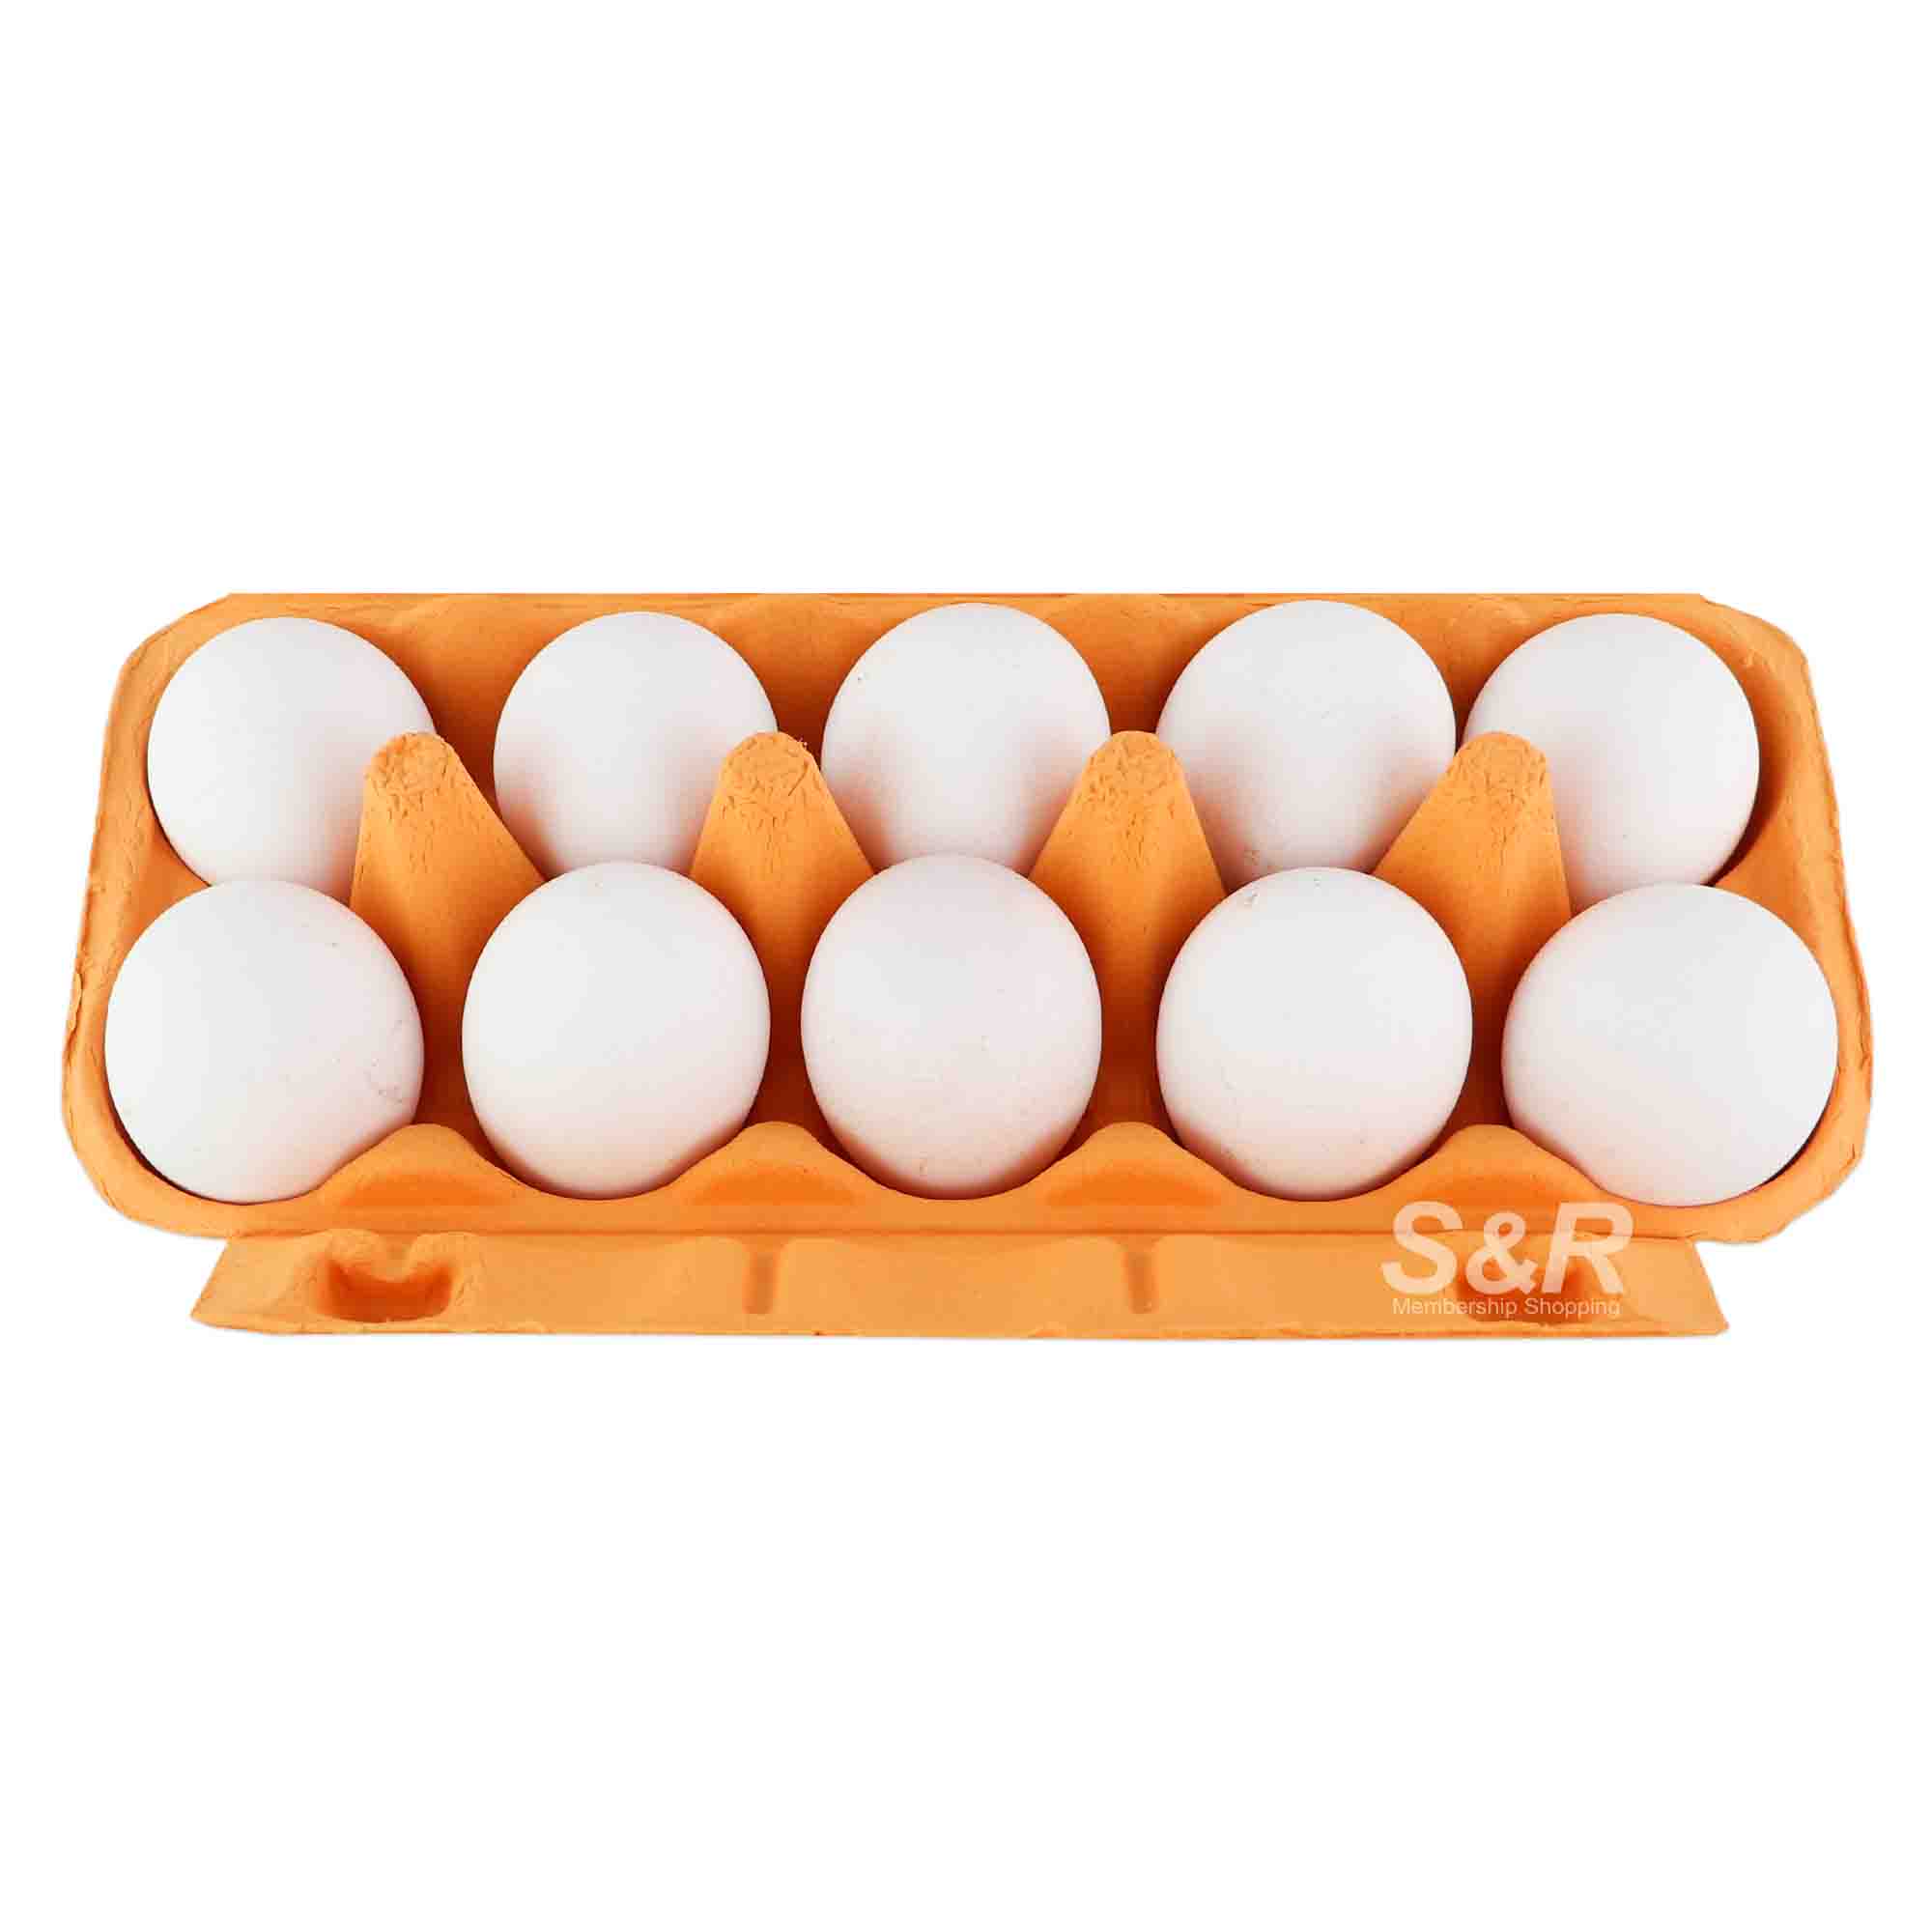 Bounty Omega-3 Enriched Specialty Eggs 10pcs